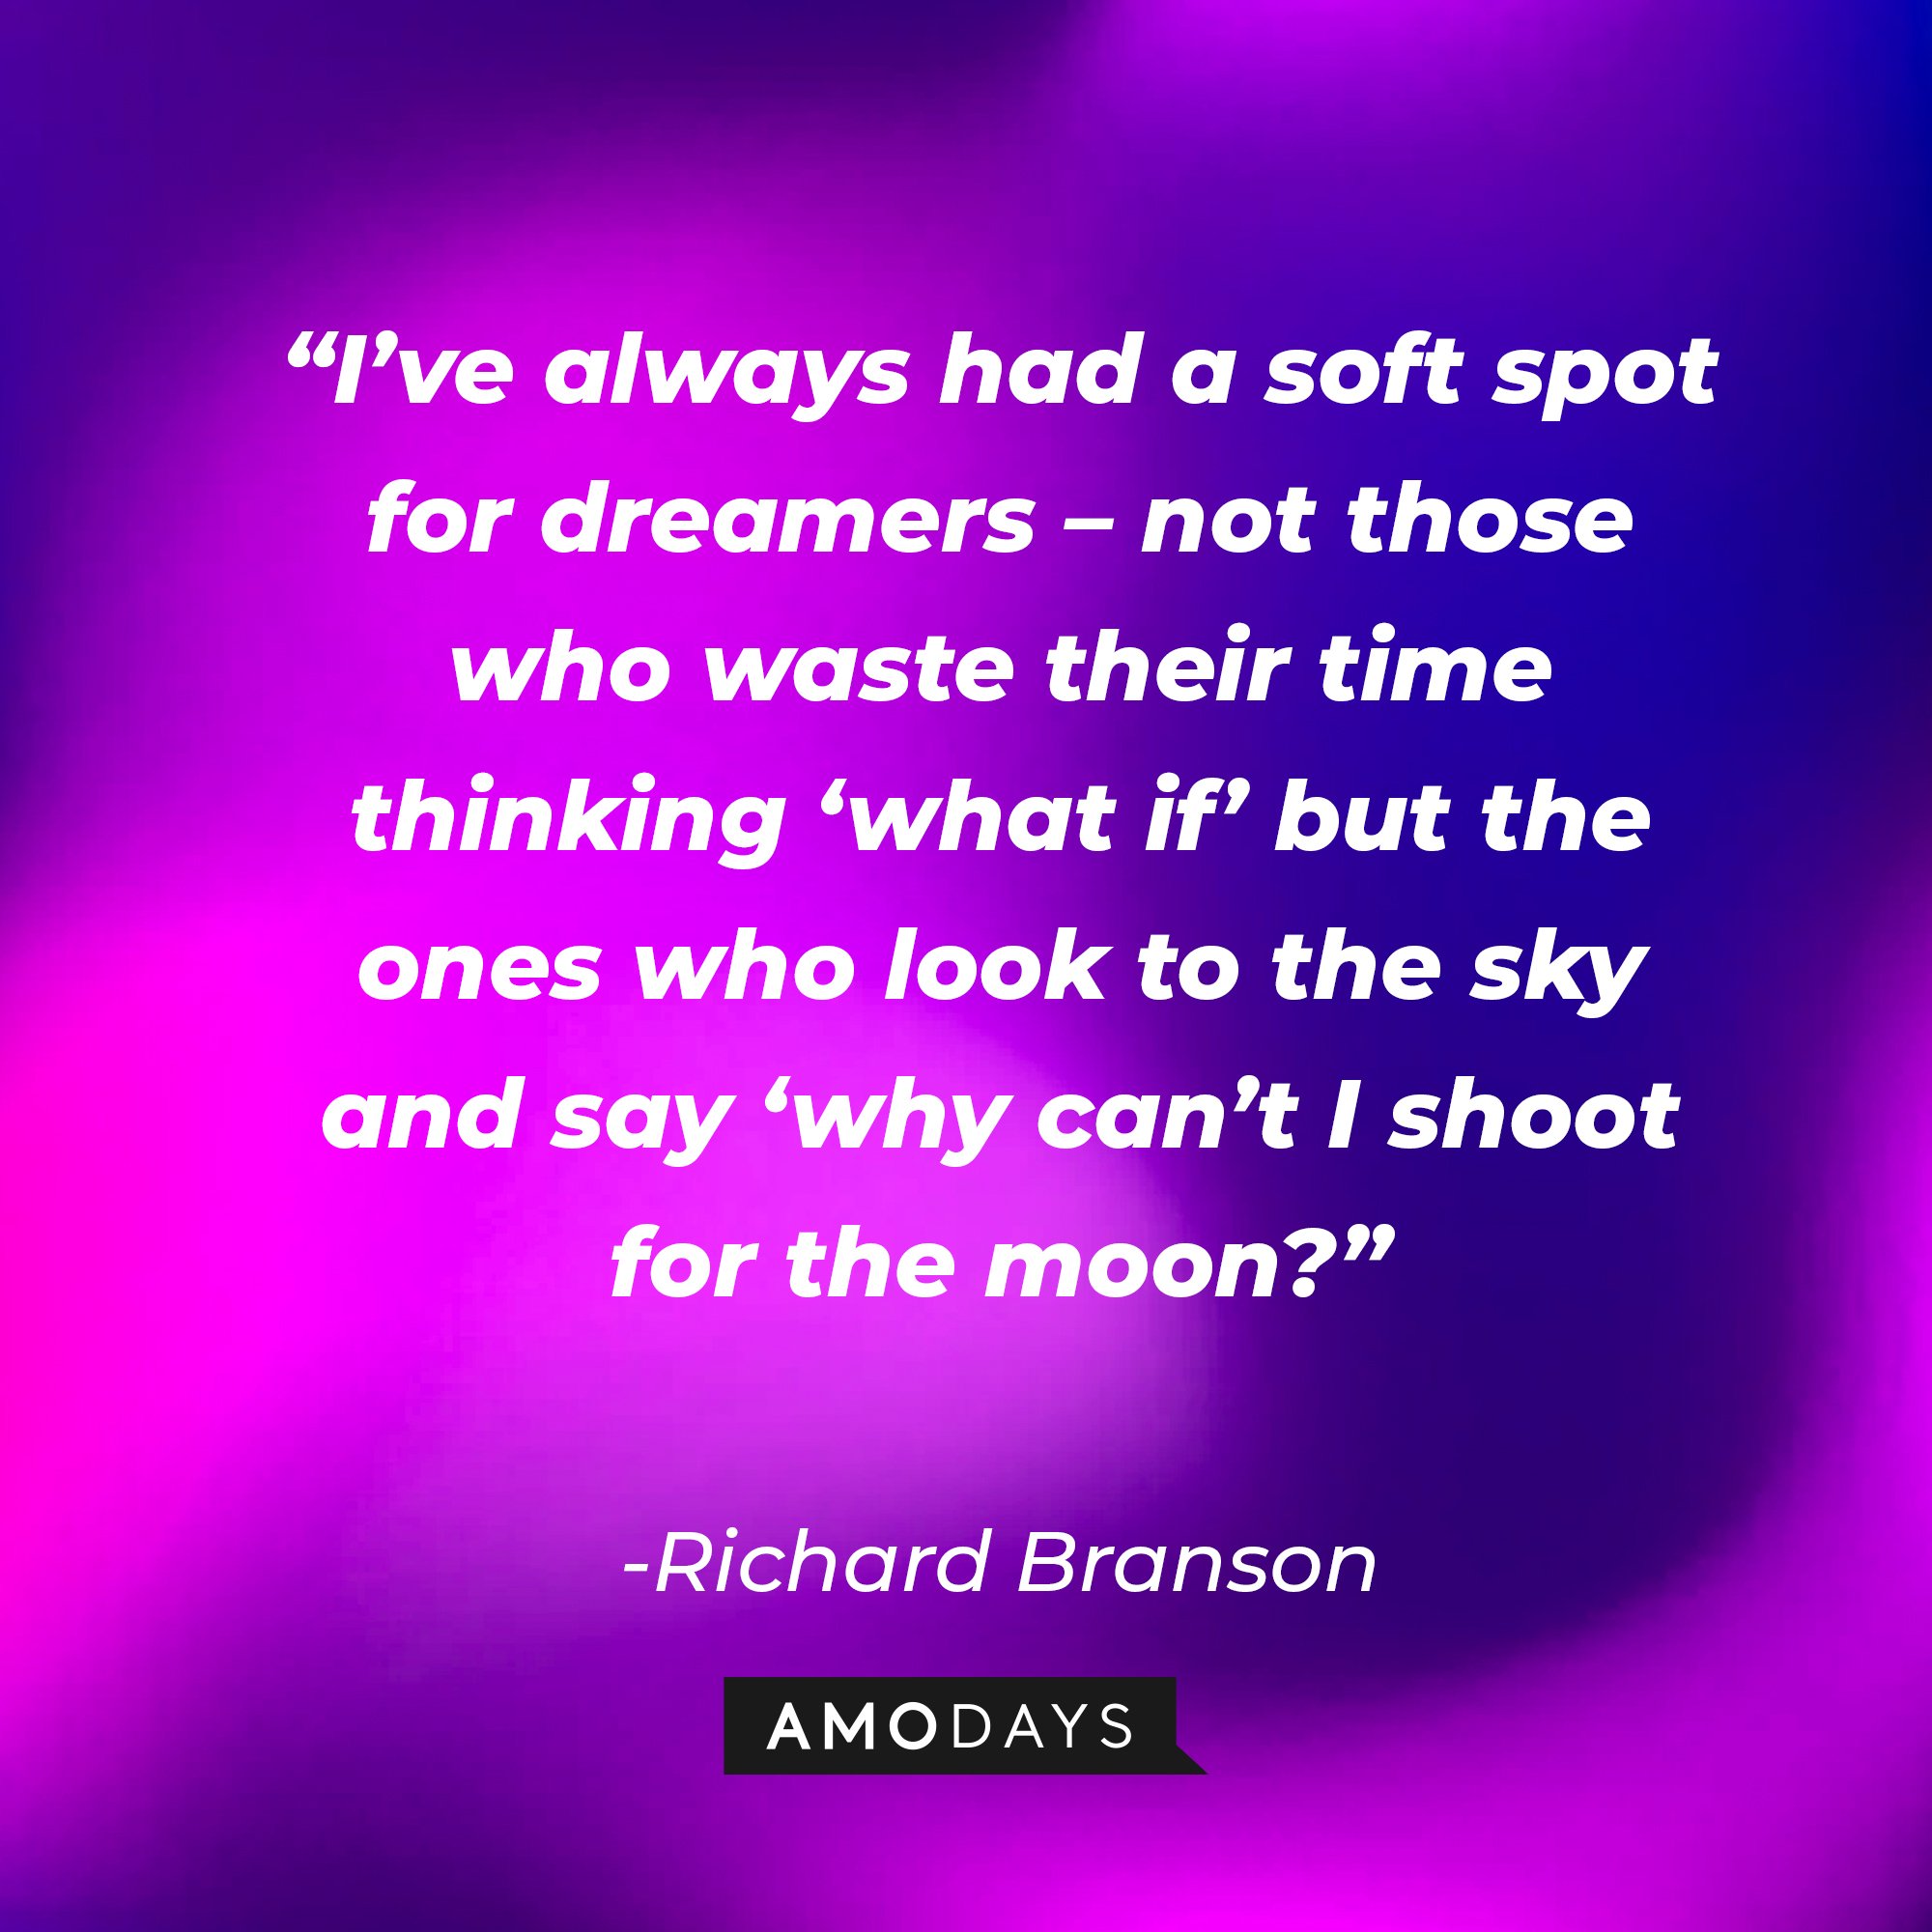 Richard Branson's quote: “I’ve always had a soft spot for dreamers – not those who waste their time thinking ‘what if’ but the ones who look to the sky and say ‘why can’t I shoot for the moon?” Image: AmoDays